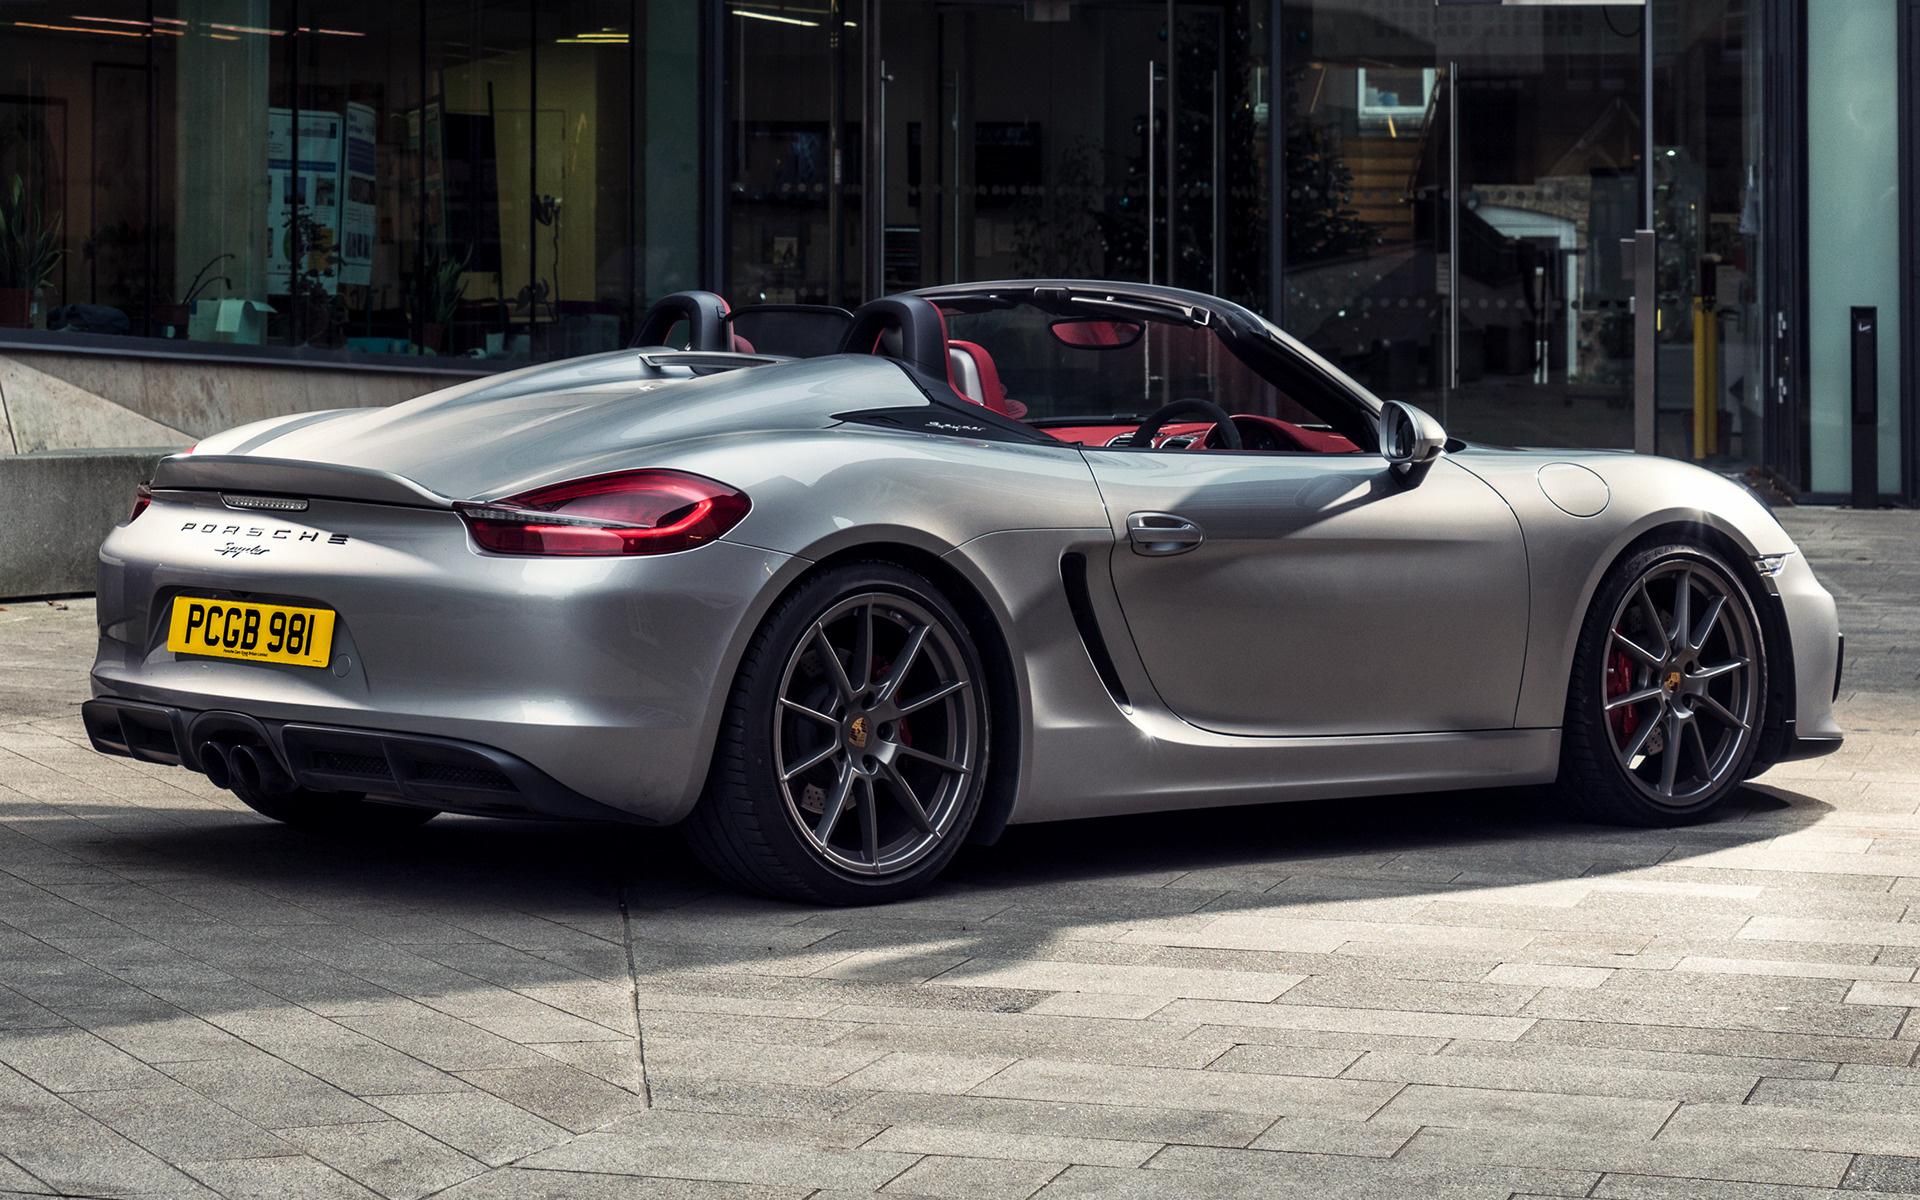 Porsche Boxster Spyder (UK) and HD Image